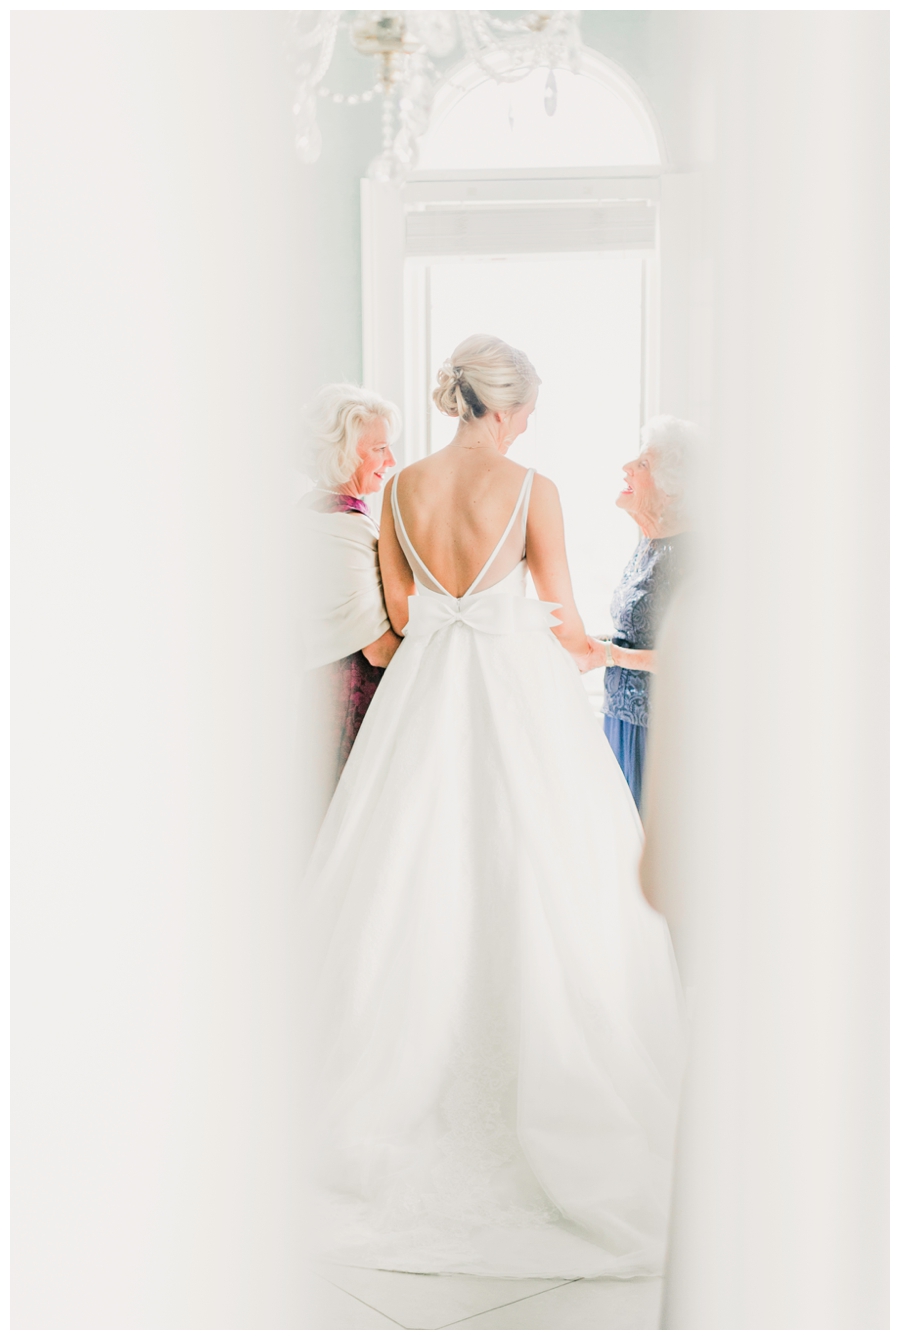 Light and Airy Photos of the bride in front of a window_0016.jpg